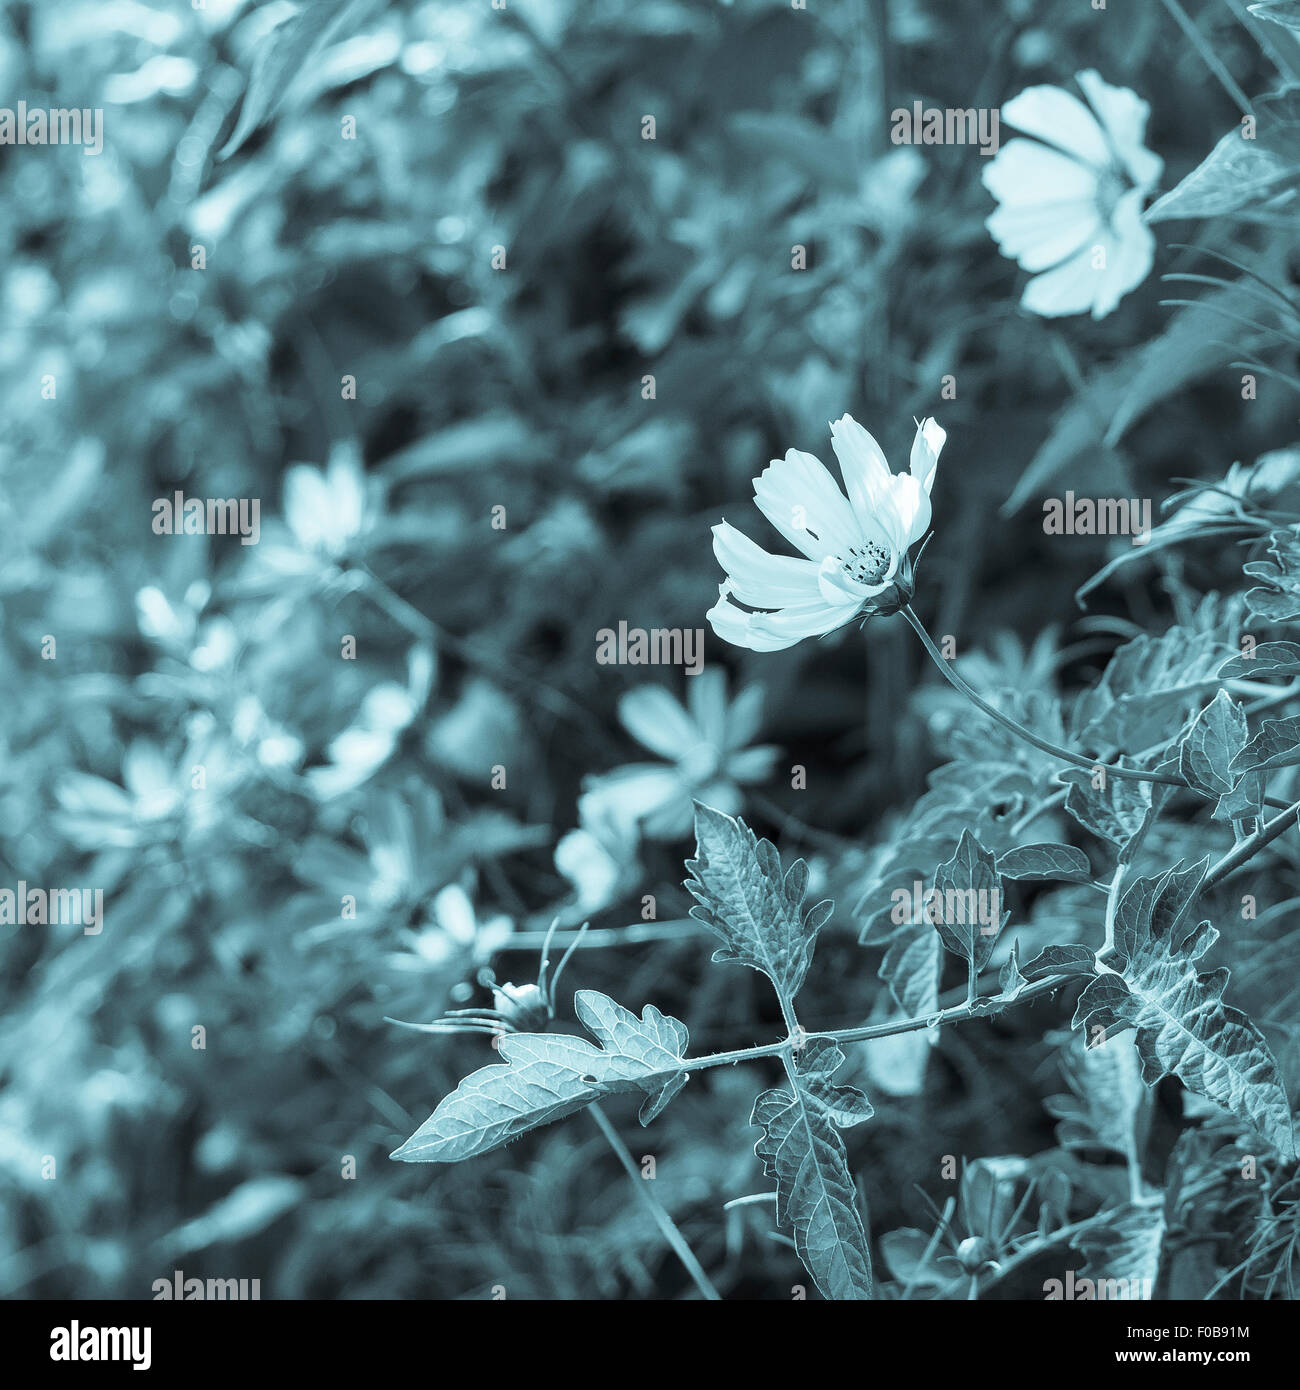 Beautiful cosmos flowers bloom in a summer garden. Cyanotype process photograph Asteraceae family Square format copy space Stock Photo